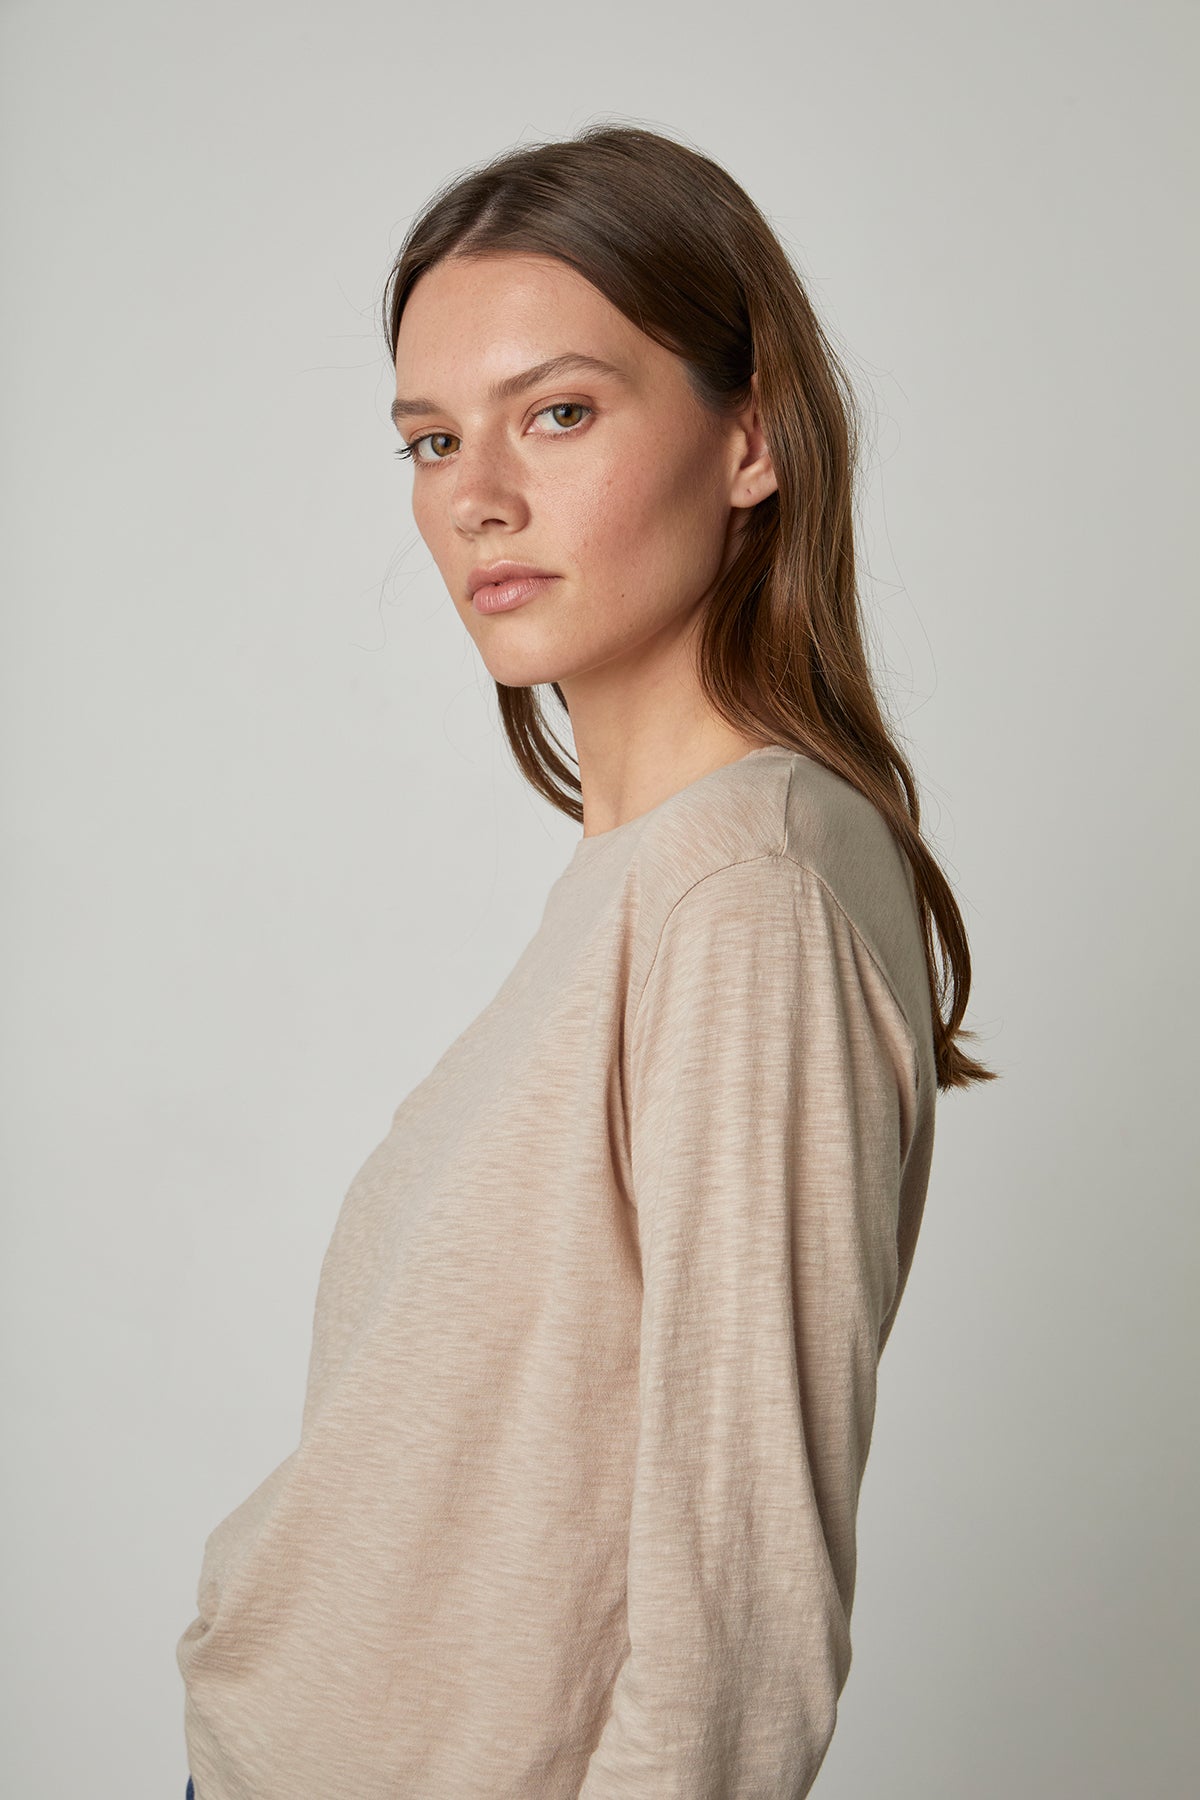 The model is wearing a Beige HESTER CREW NECK TEE by Velvet by Graham & Spencer and jeans.-24532973617345